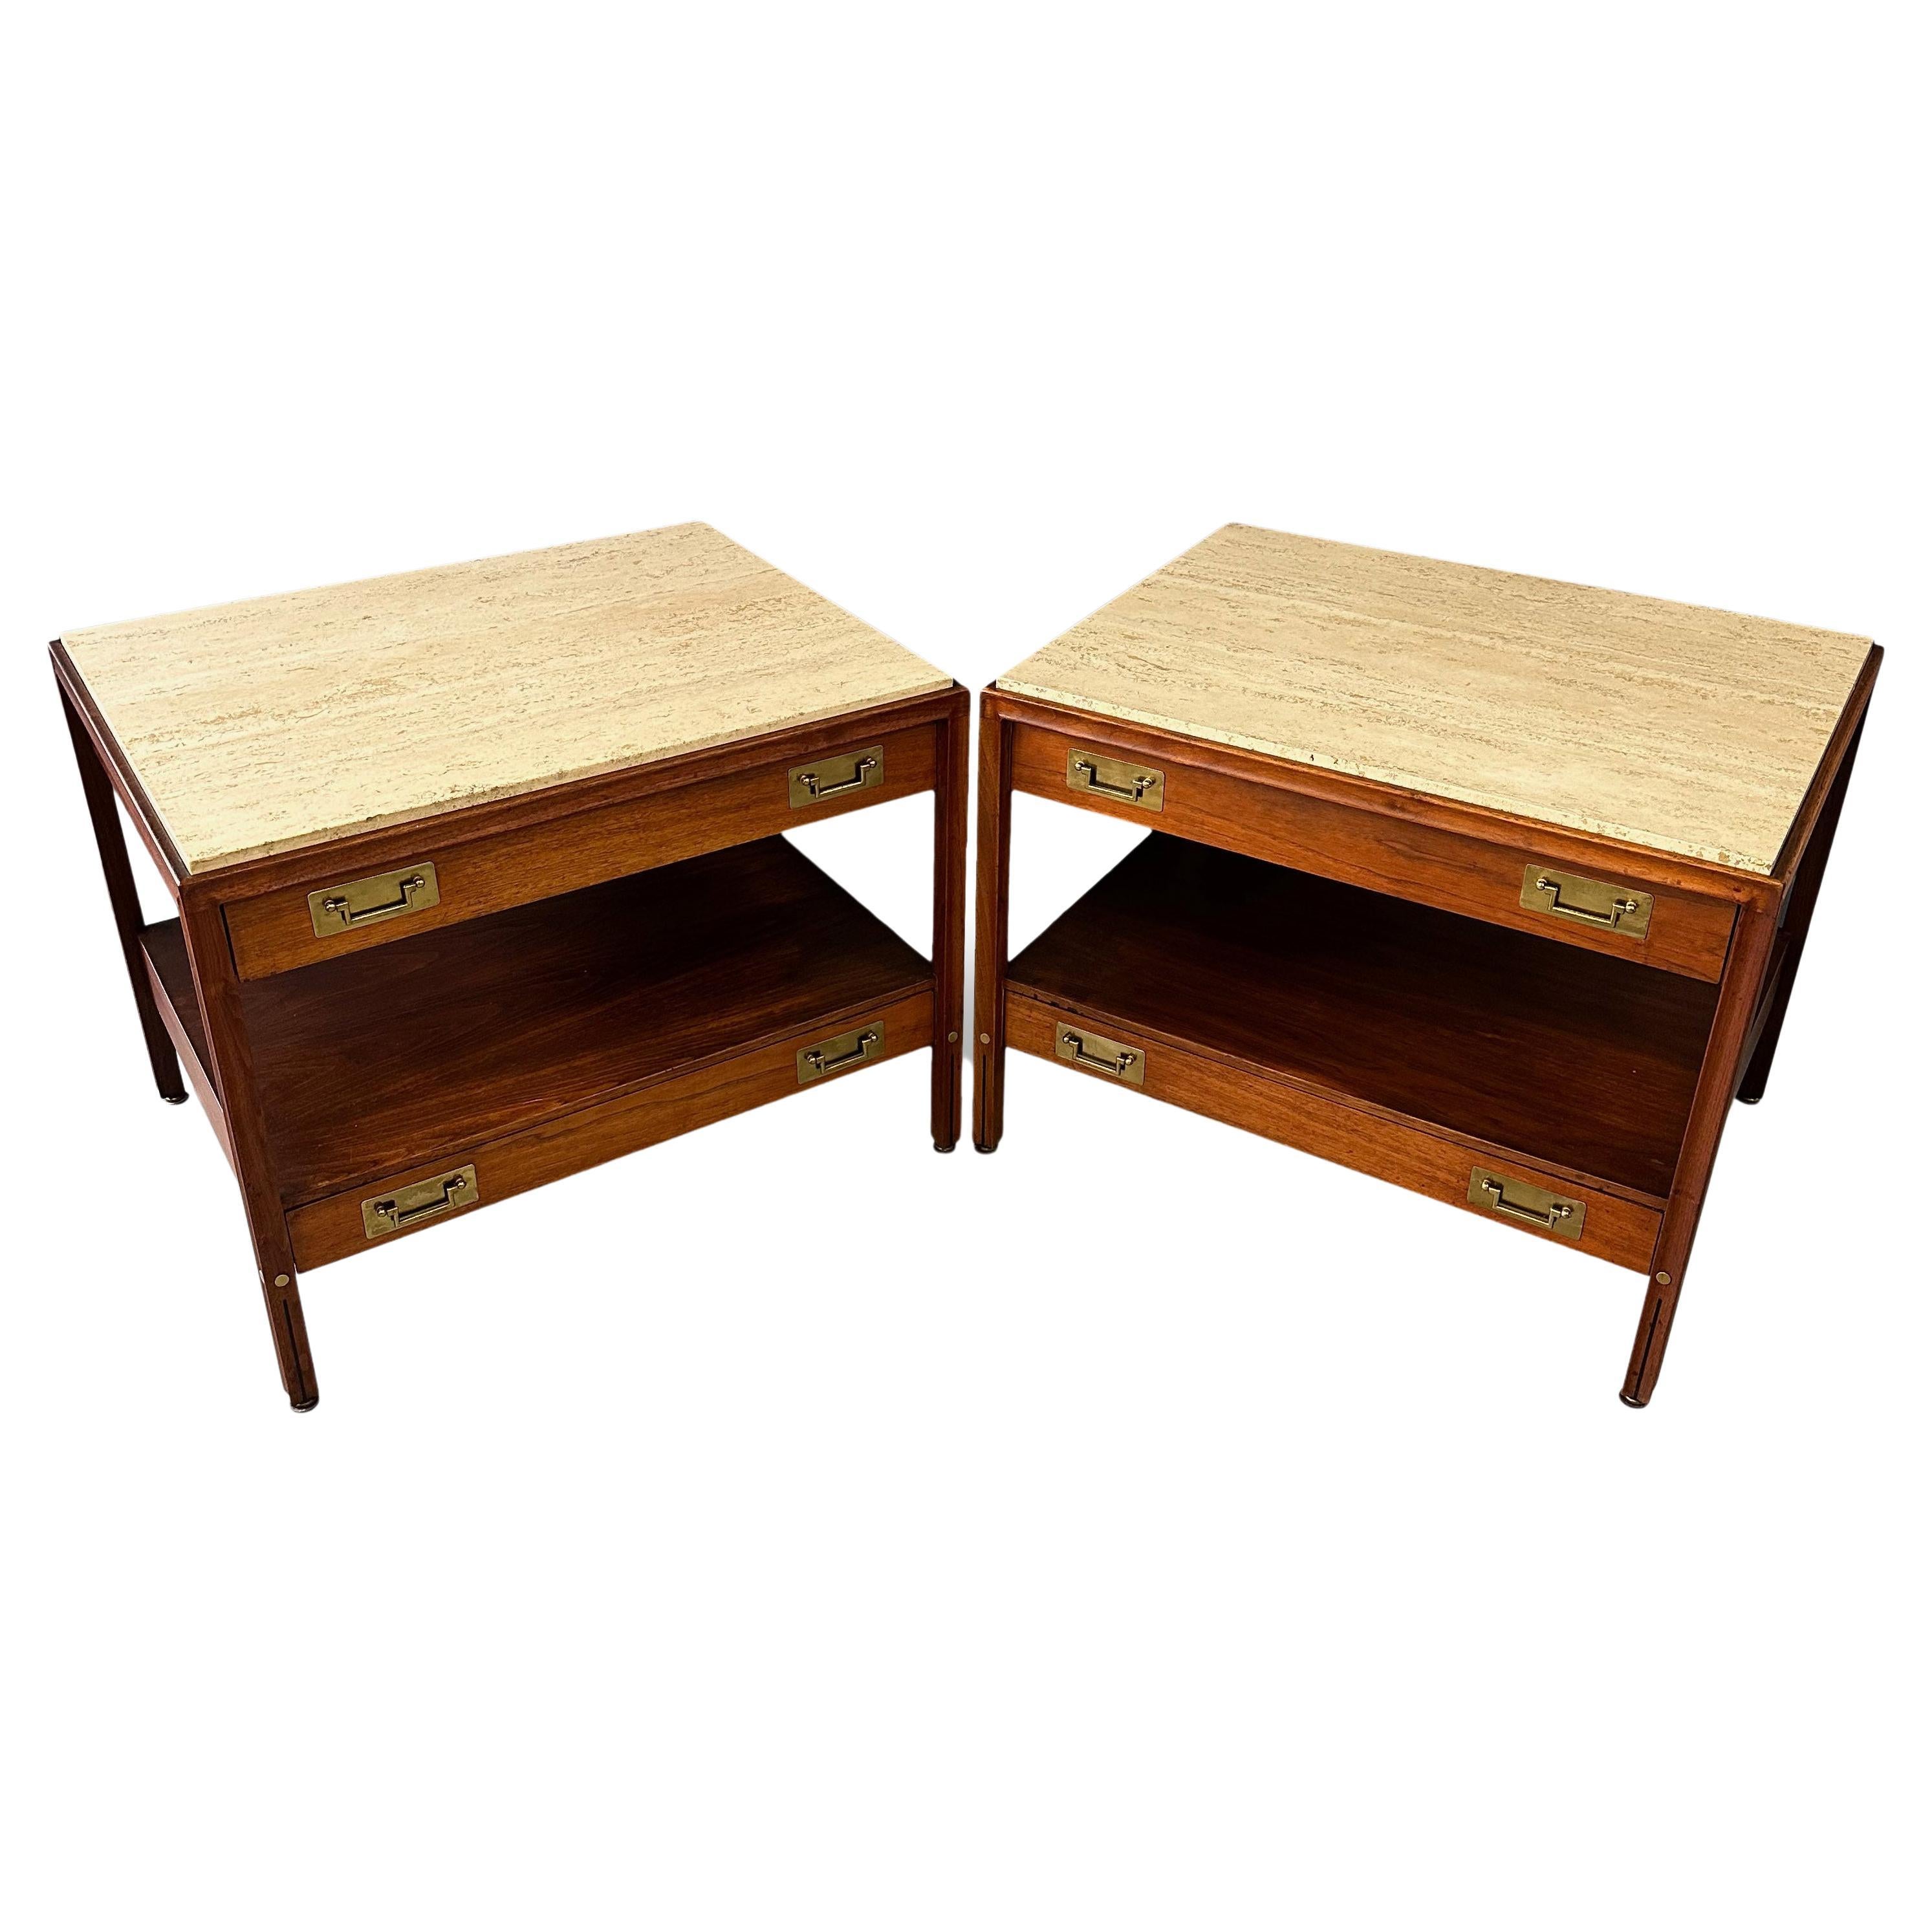 Pair of Walnut and Travertine Nightstands with Brass Accents and Rosewood Trim